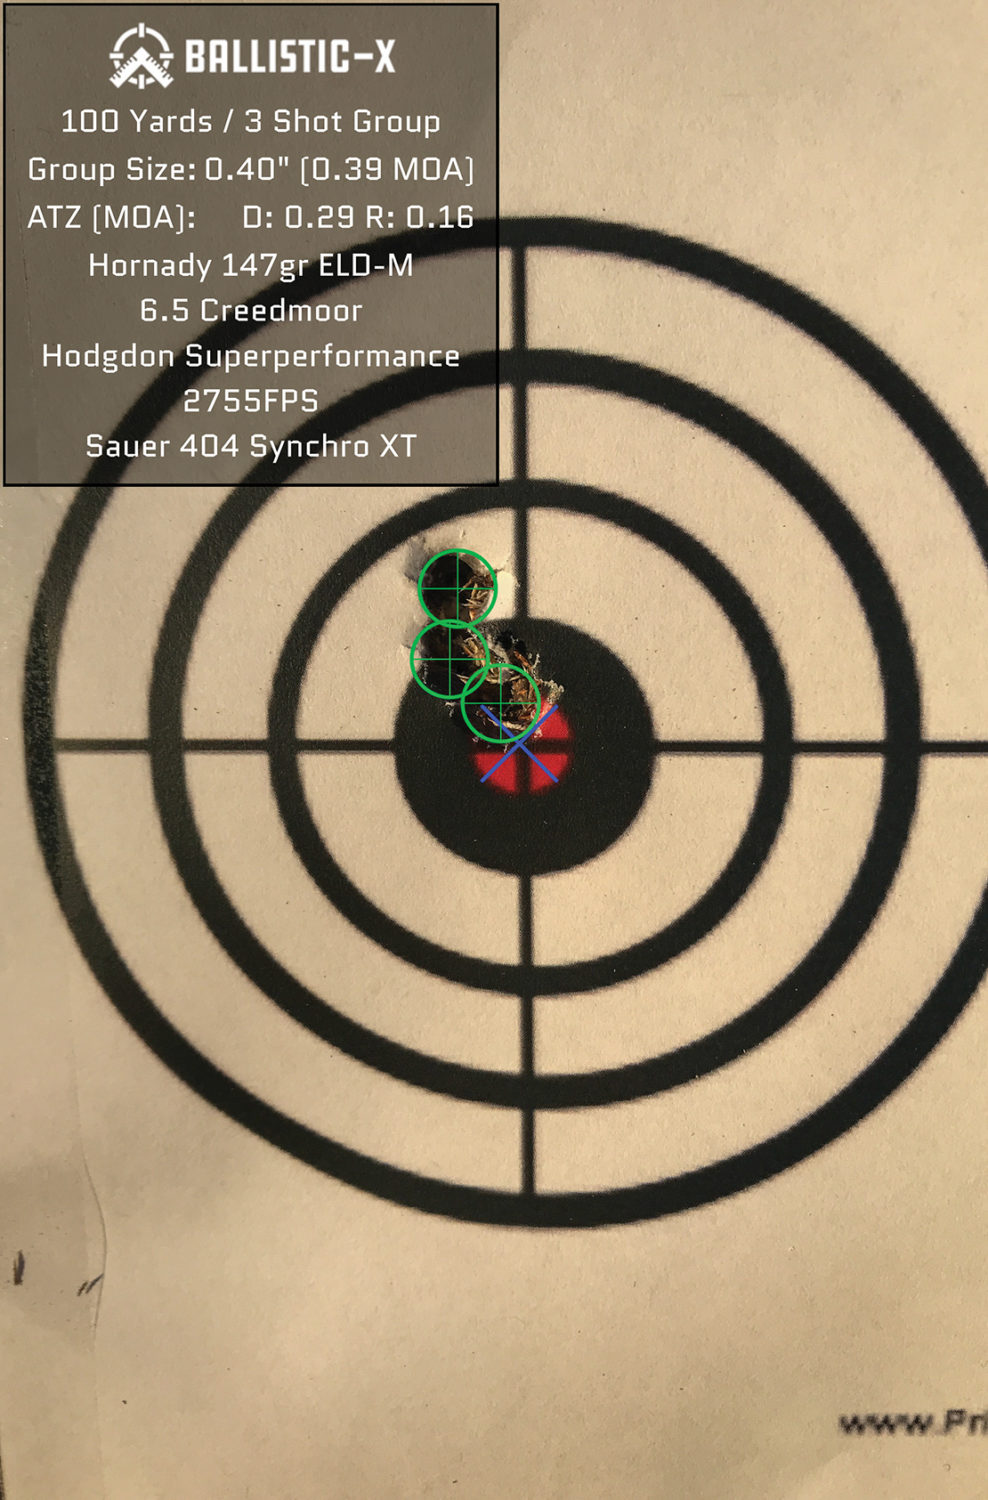 The 147 ELD-M grouped sub .5 MOA thoughout the entire ladder and would be my choice of the three for a multi-purpose hunting/target round.